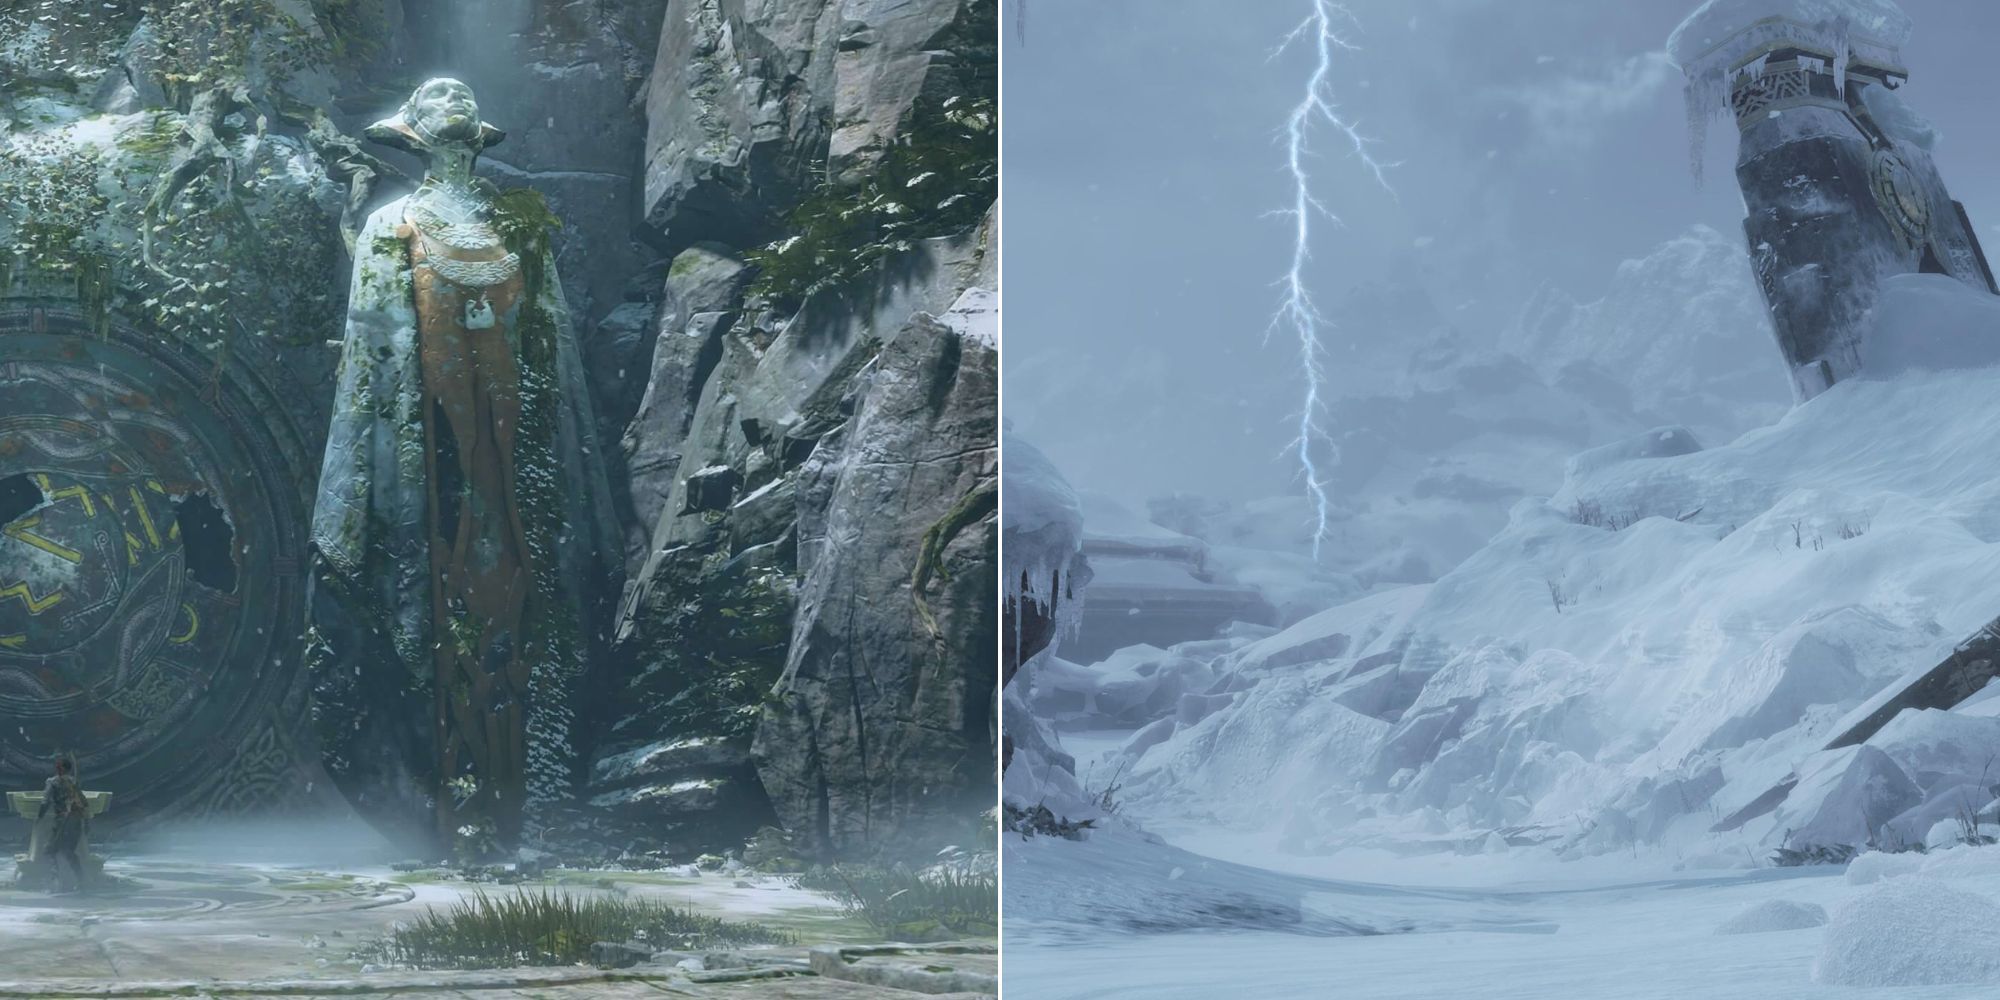 Split image of God of War. On the left is a towering green statue from God of War 2018. On the right is lightning in Midgard during Ragnarok, reaching all the way from the sky to the ground.